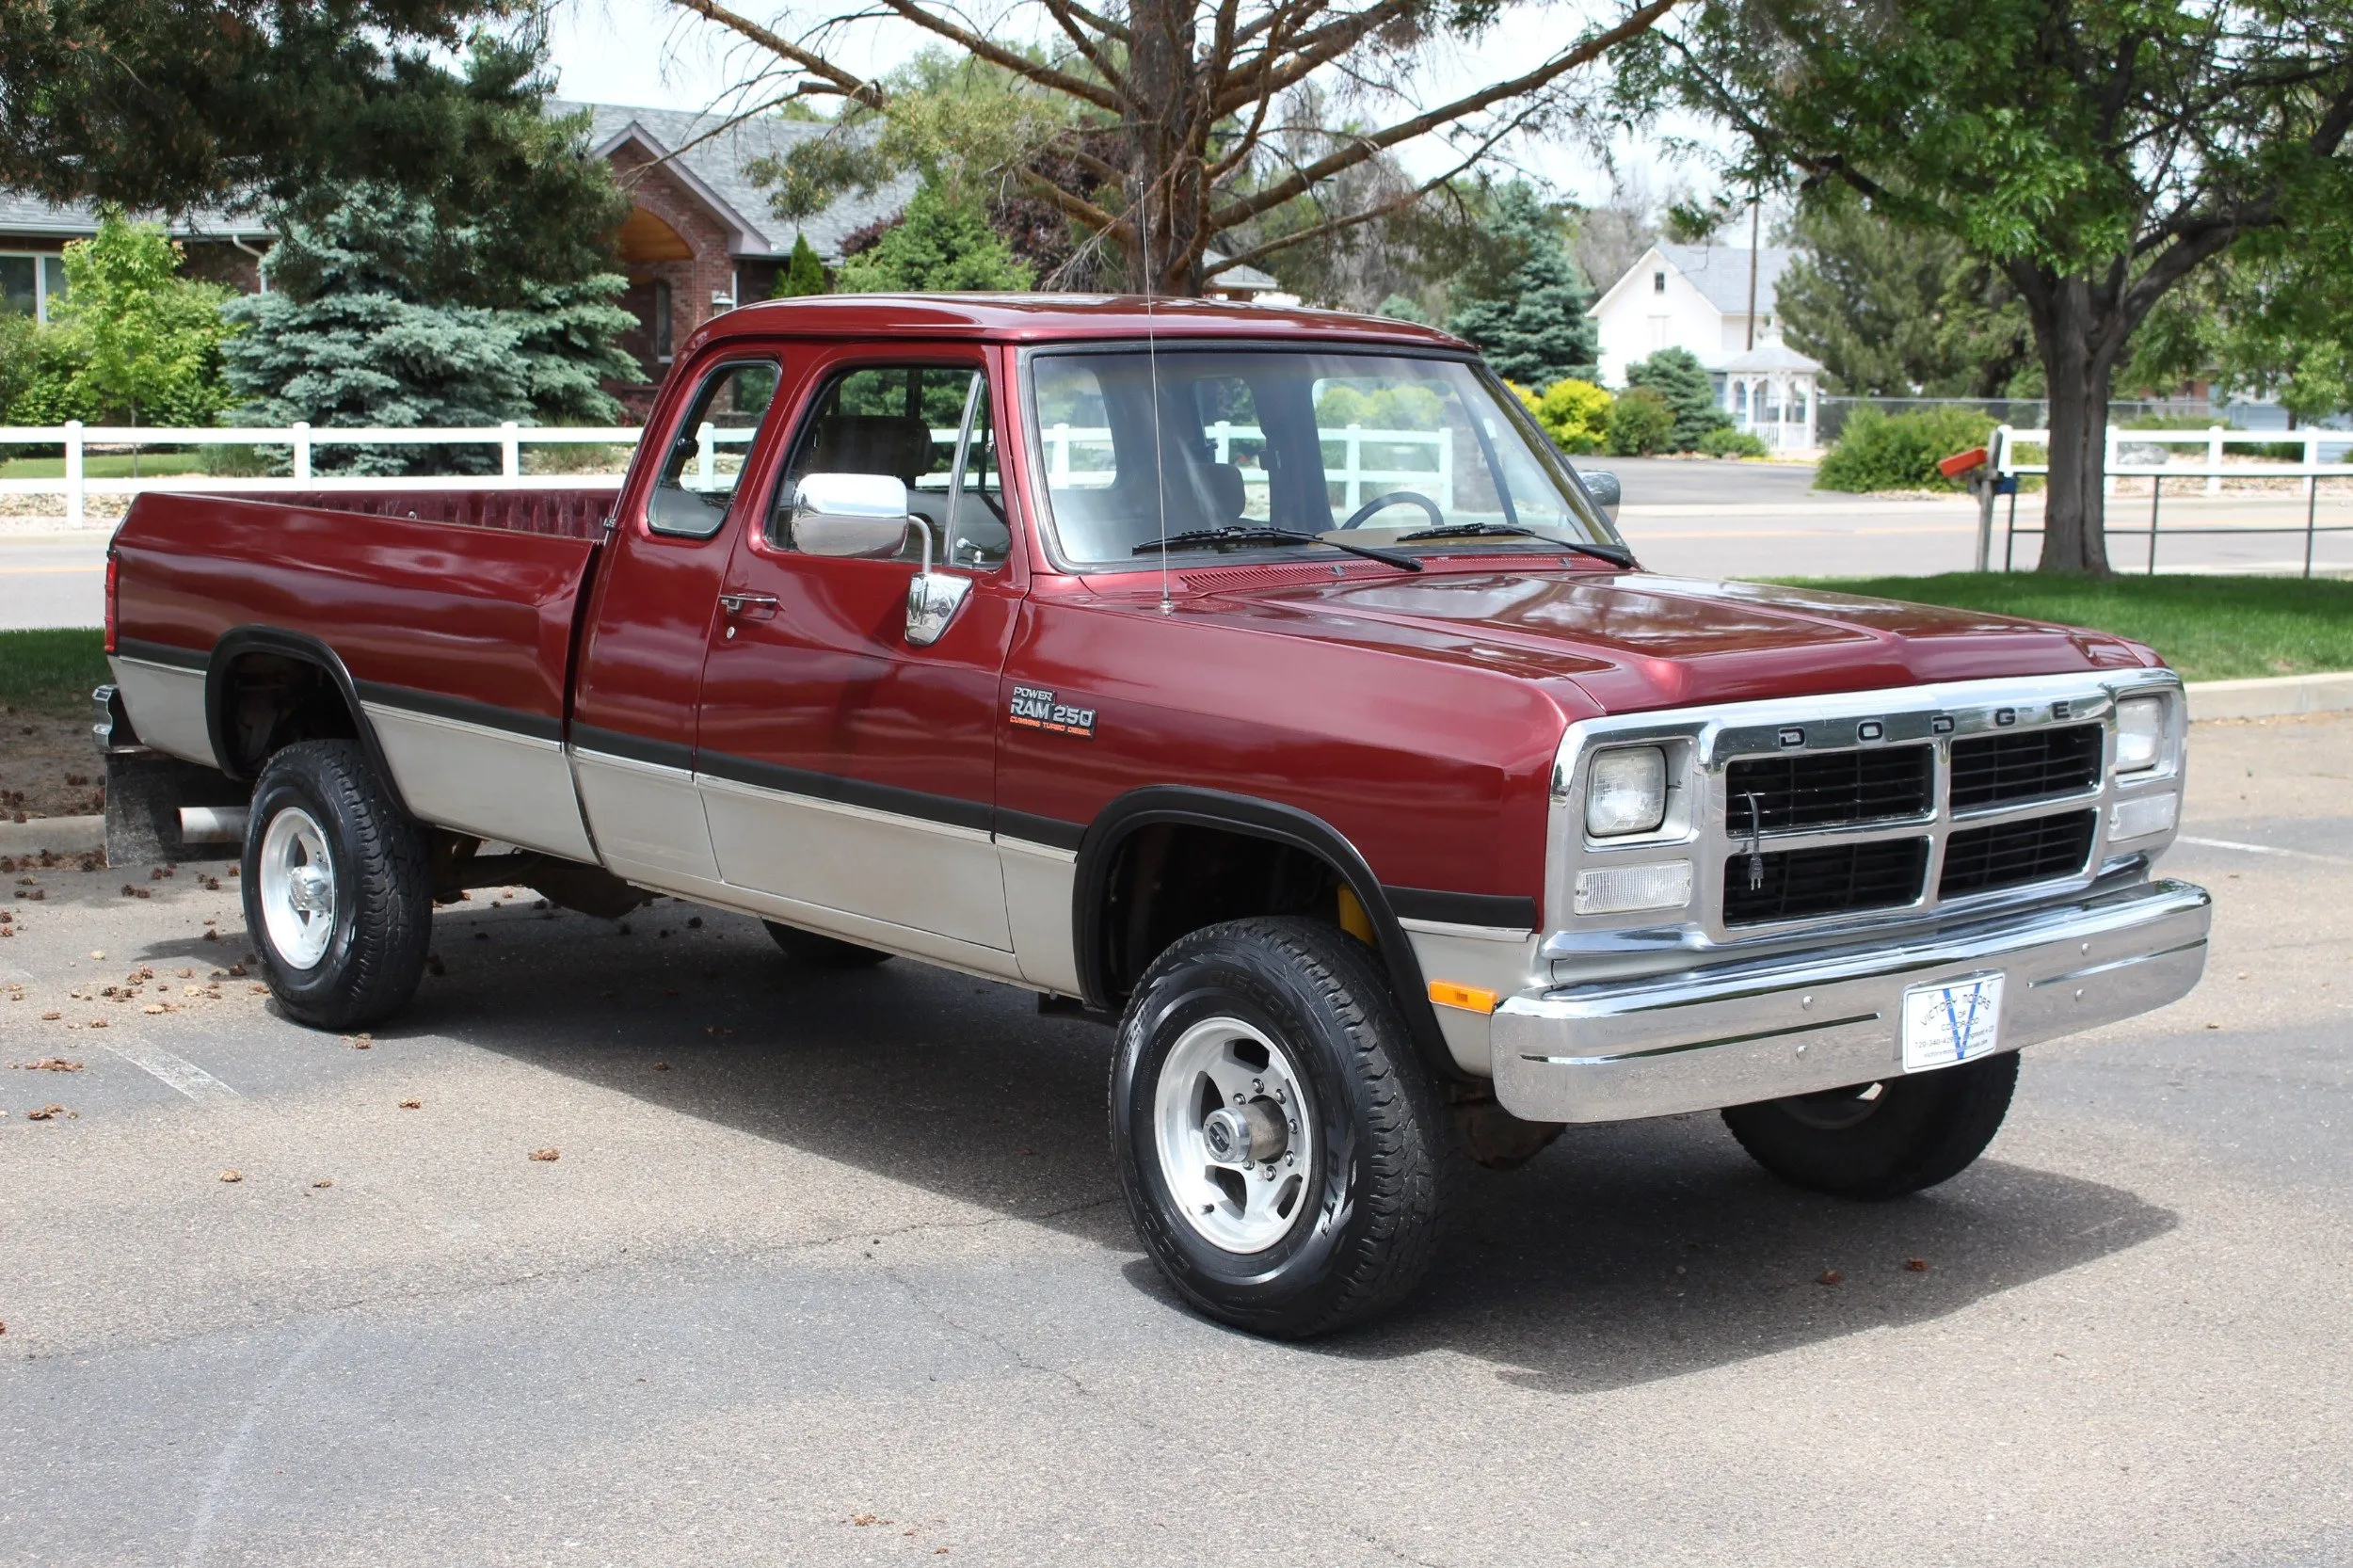 Dodge RAM 250 from 1993